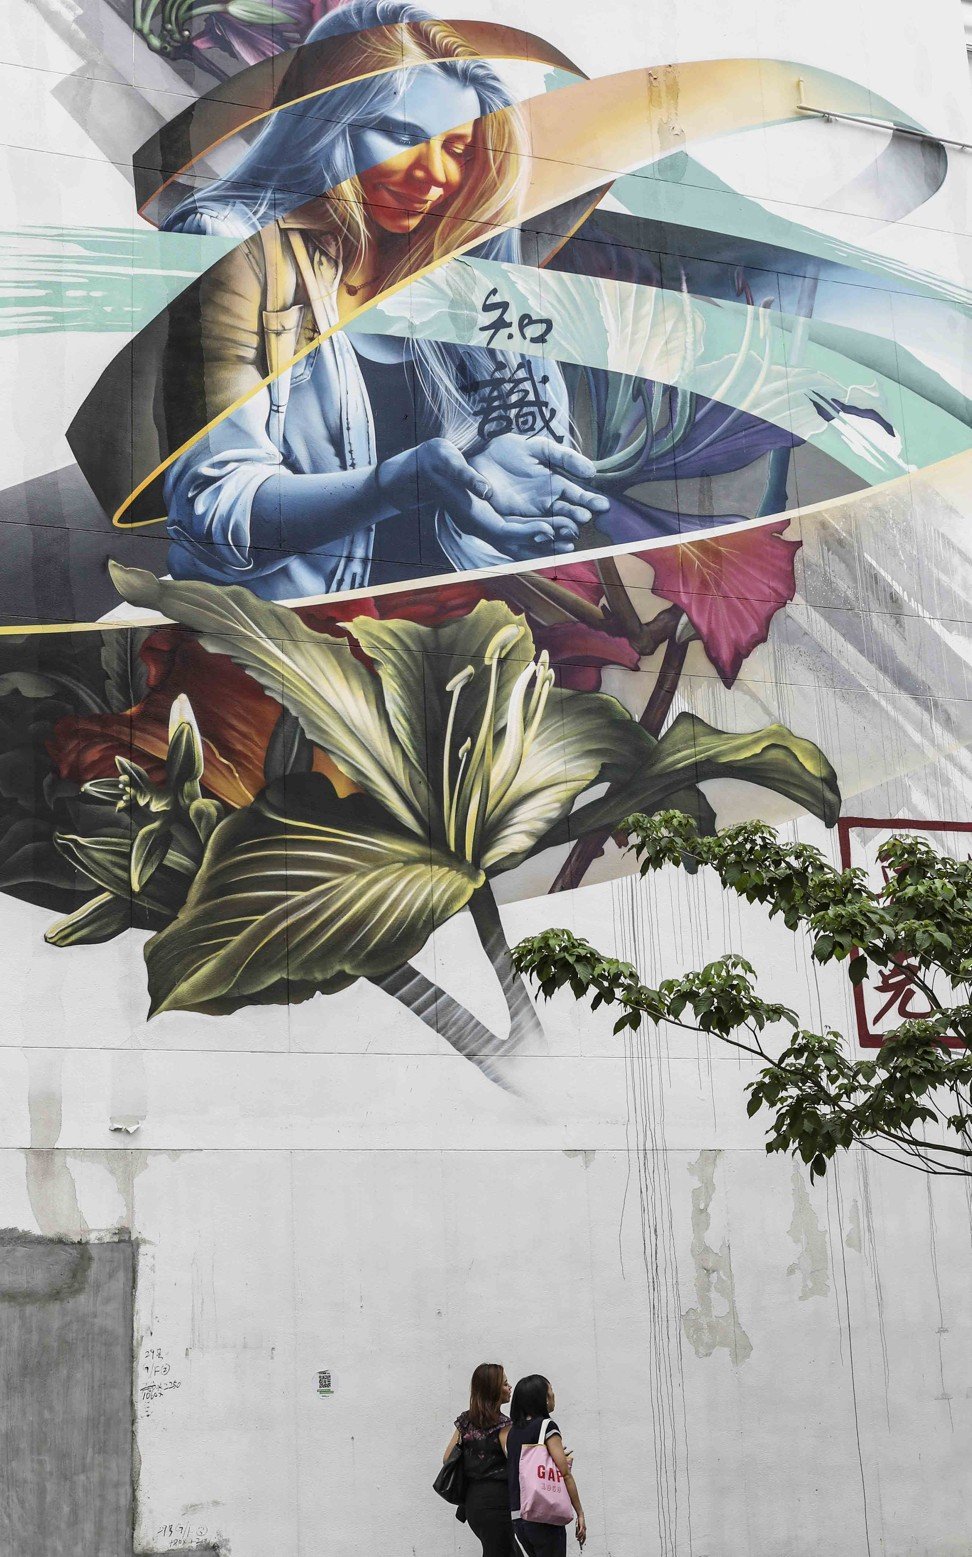 A mural by the artist Fluke on the Hong Kong Institute of Vocational Education, at 6 Oi Kwan Road. Hailing from Montreal, Canada, Fluke excels in large-scale murals that blend photo­realistic subjects with bands of colour and giant brush­strokes. The woman featured here is the artist’s teacher sister, a nod to the piece’s location among schools. The message in her hands reads “knowledge”. Photo: Martin Chan